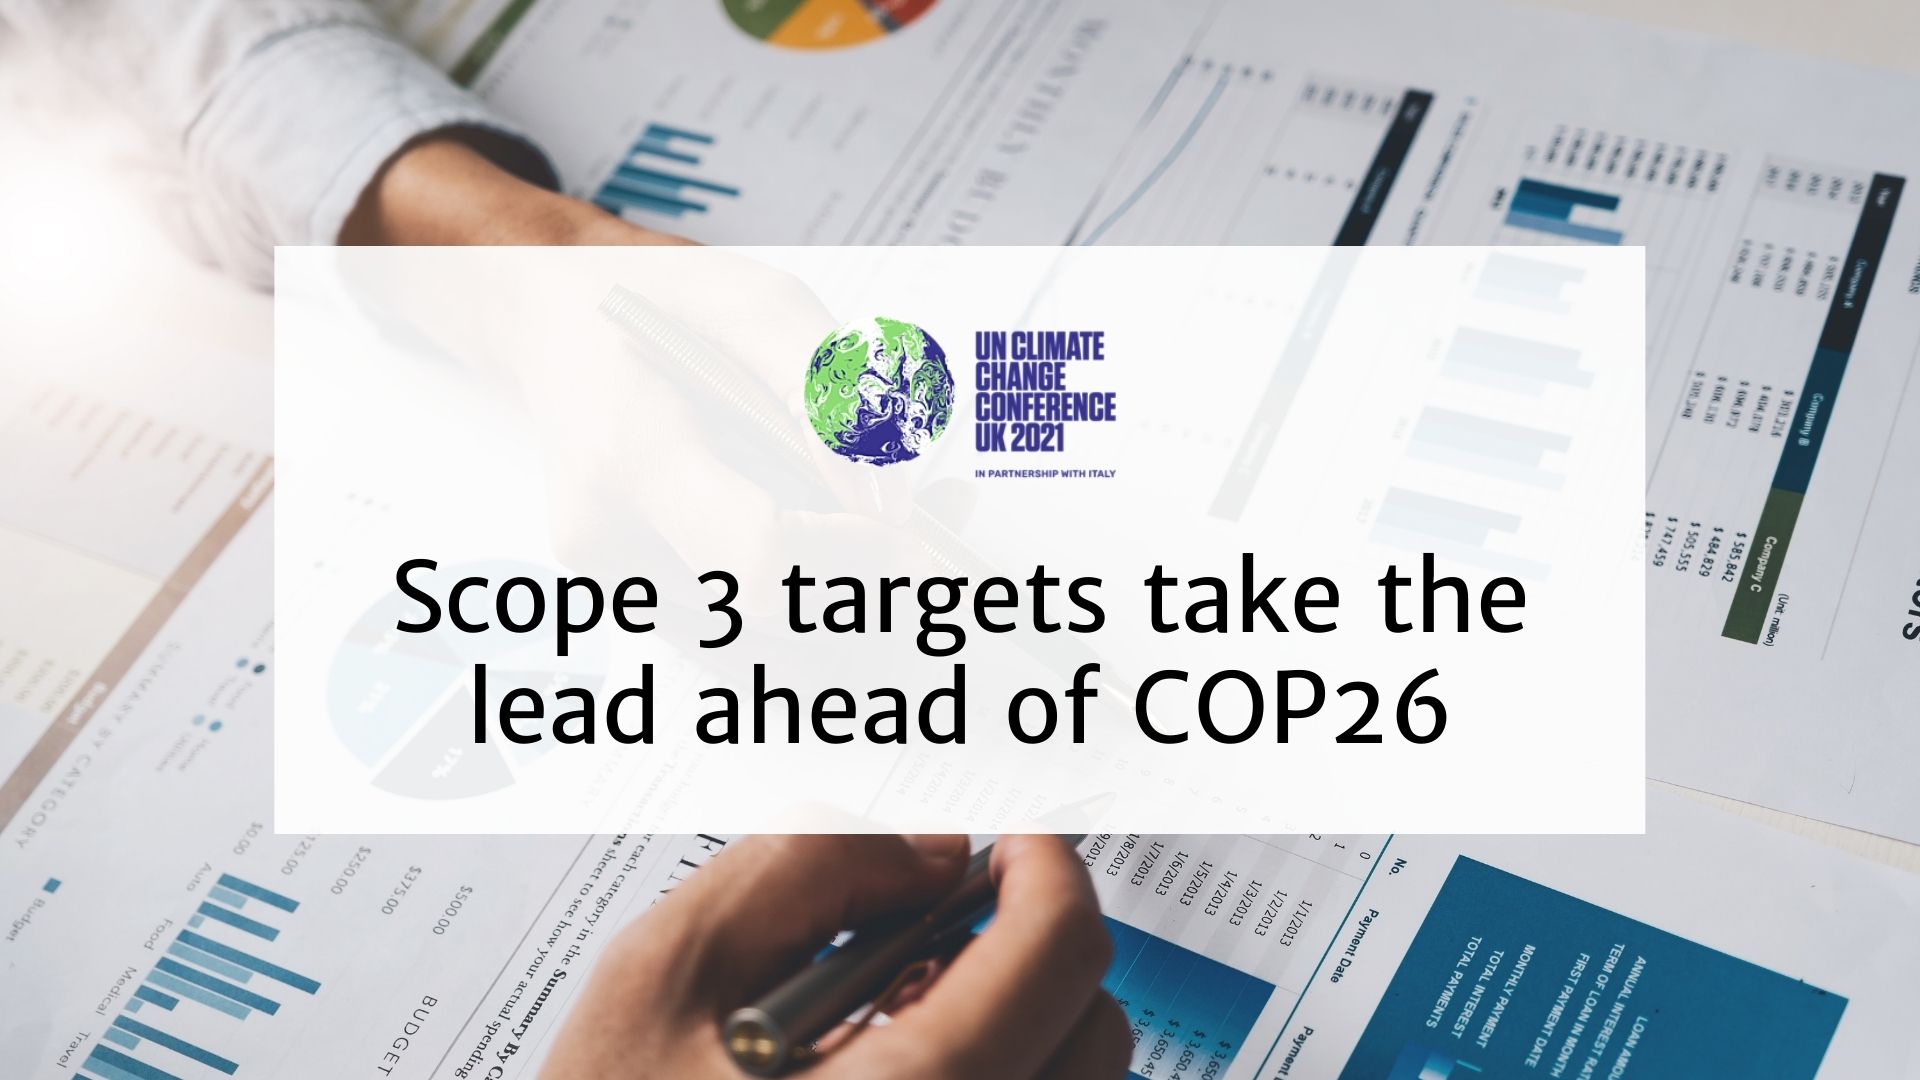 Scope 3 targets take the lead ahead of COP26 – but are businesses ready?